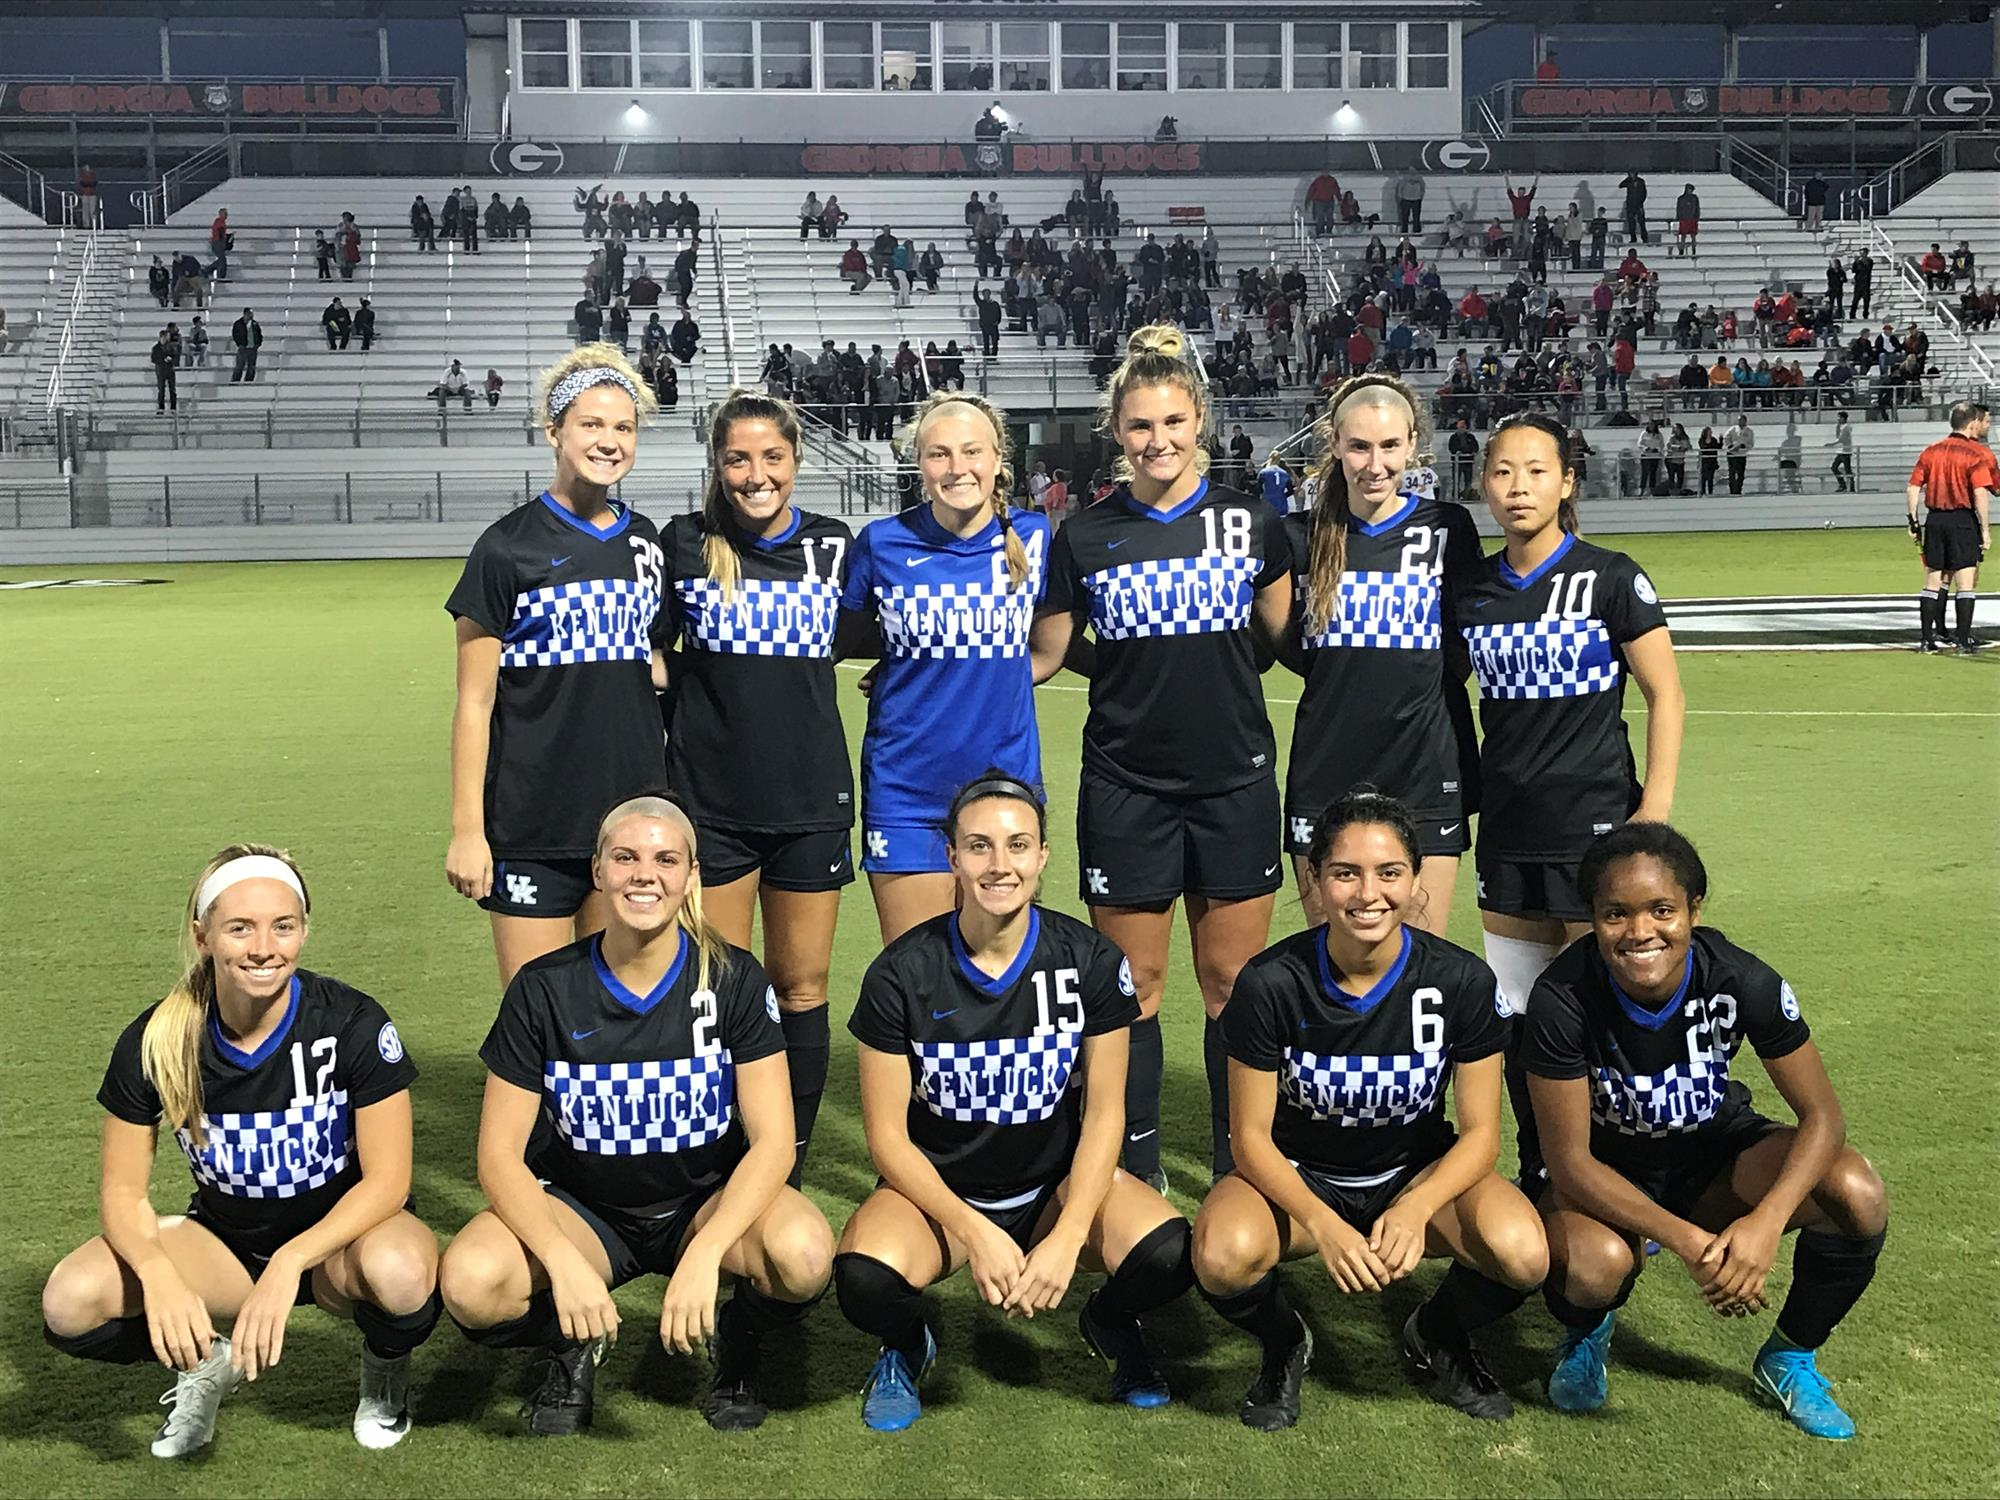 Kentucky Concludes 2017 on High Notes, Earns 3-0 Win at UGA